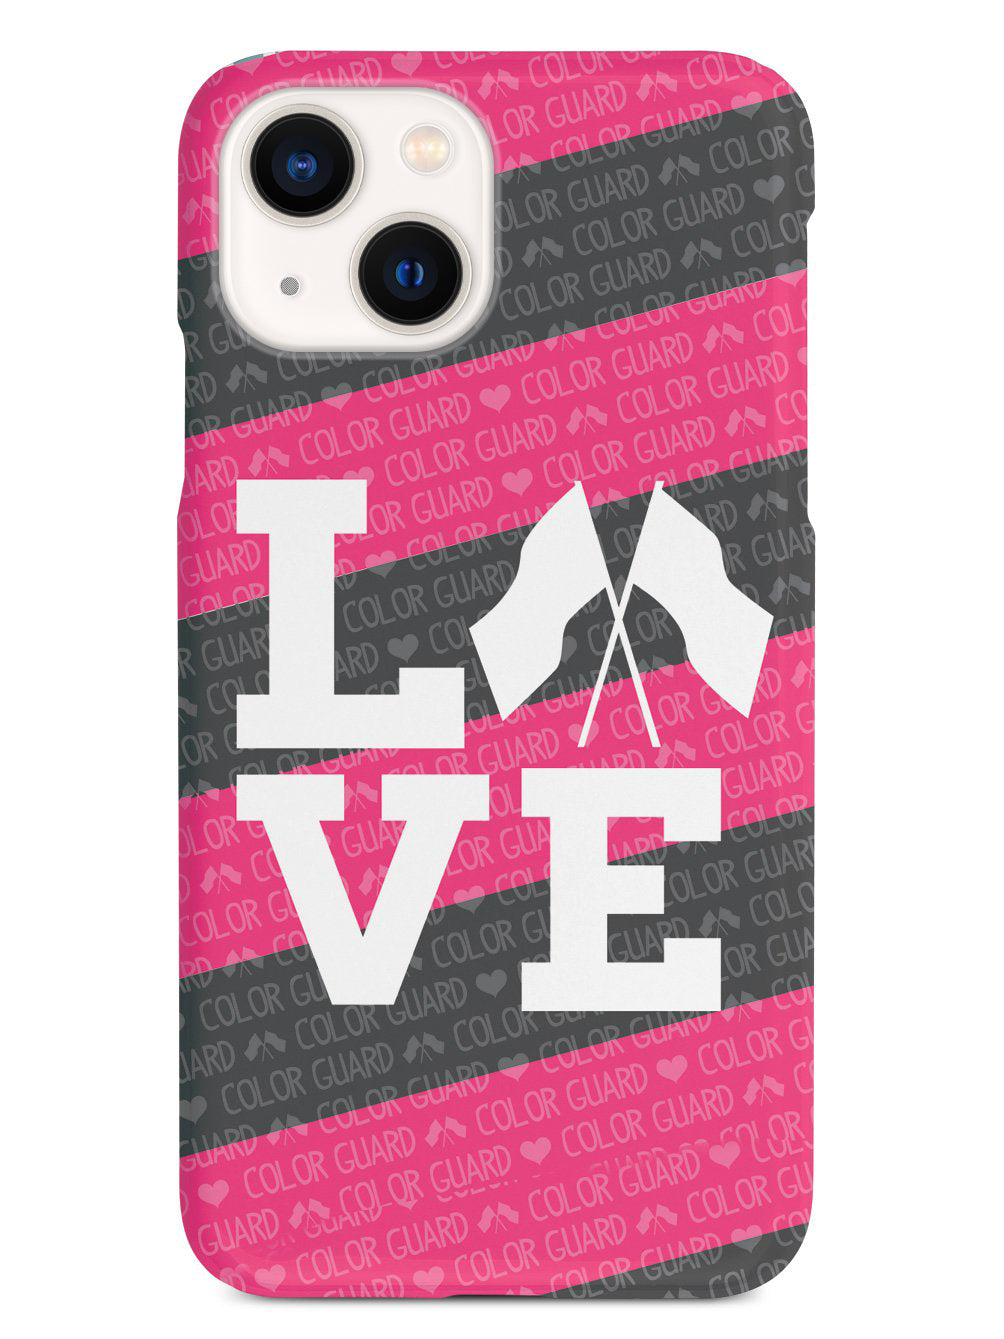 Color Guard Marching Band Flag  Love Case